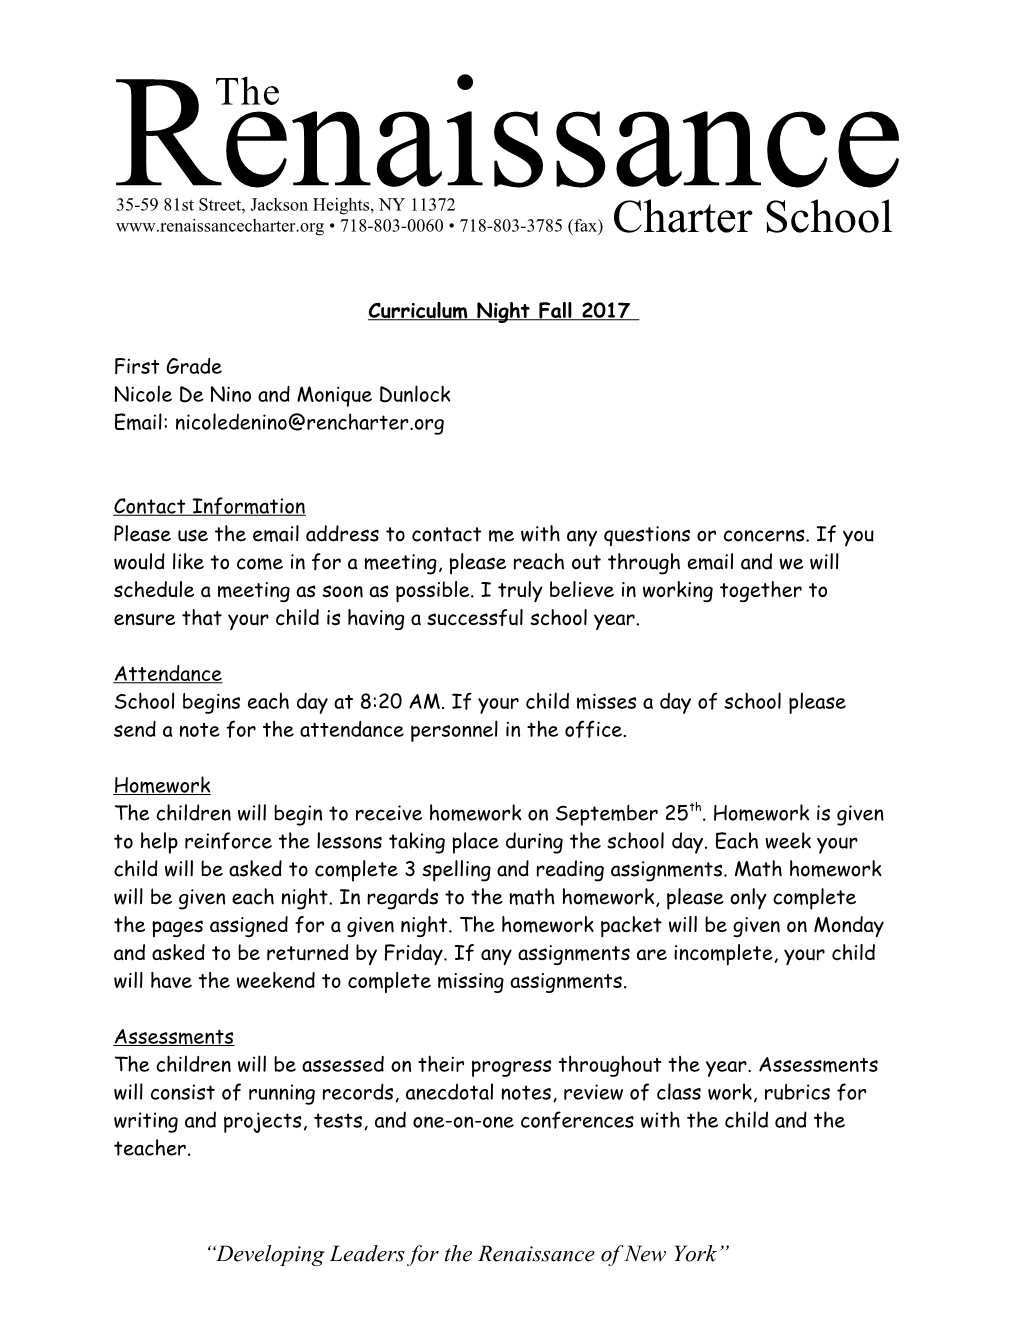 The Renaissance Charter Schoolpage 1 of 8